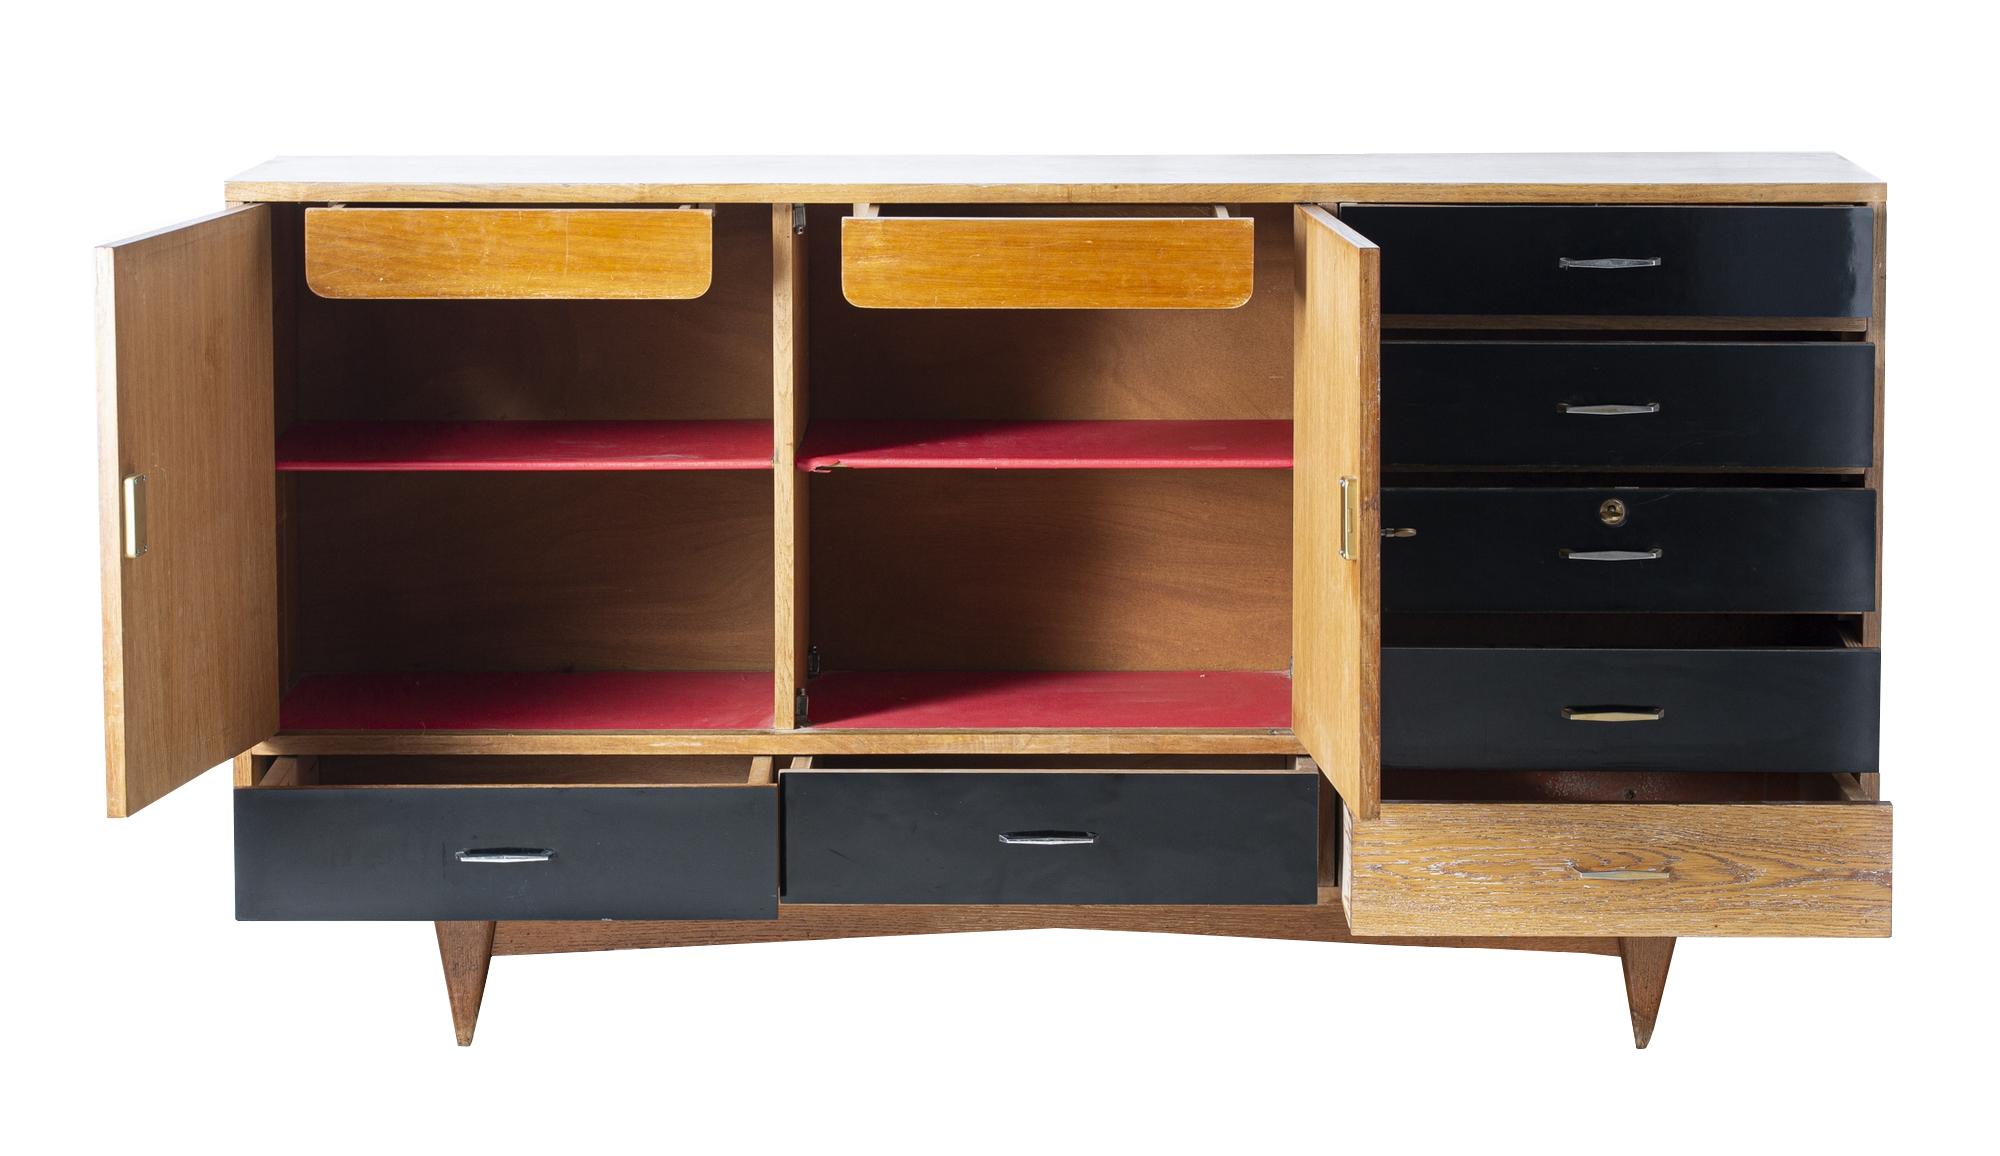 Sideboard from the 1950s designed by Charles Ramos (born in 1925) and edited by Magnani.

Ash structure resting on four saber legs, with two hinged doors, two drawers under the doors and five drawers in a row, in an alternation of ash and black